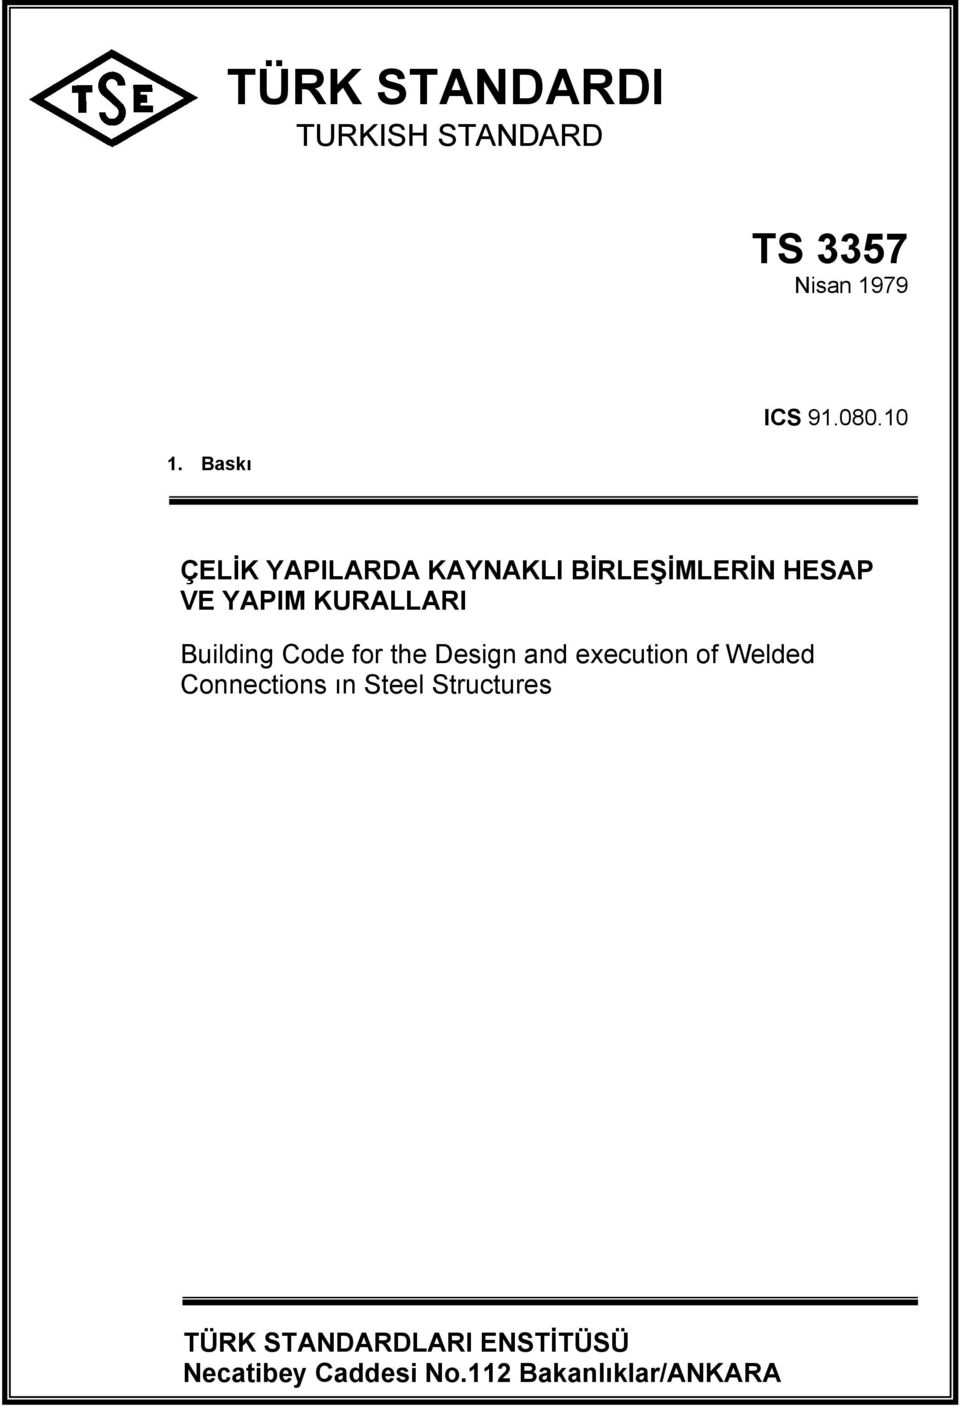 Building Code for the Design and execution of Welded Connections ın Steel